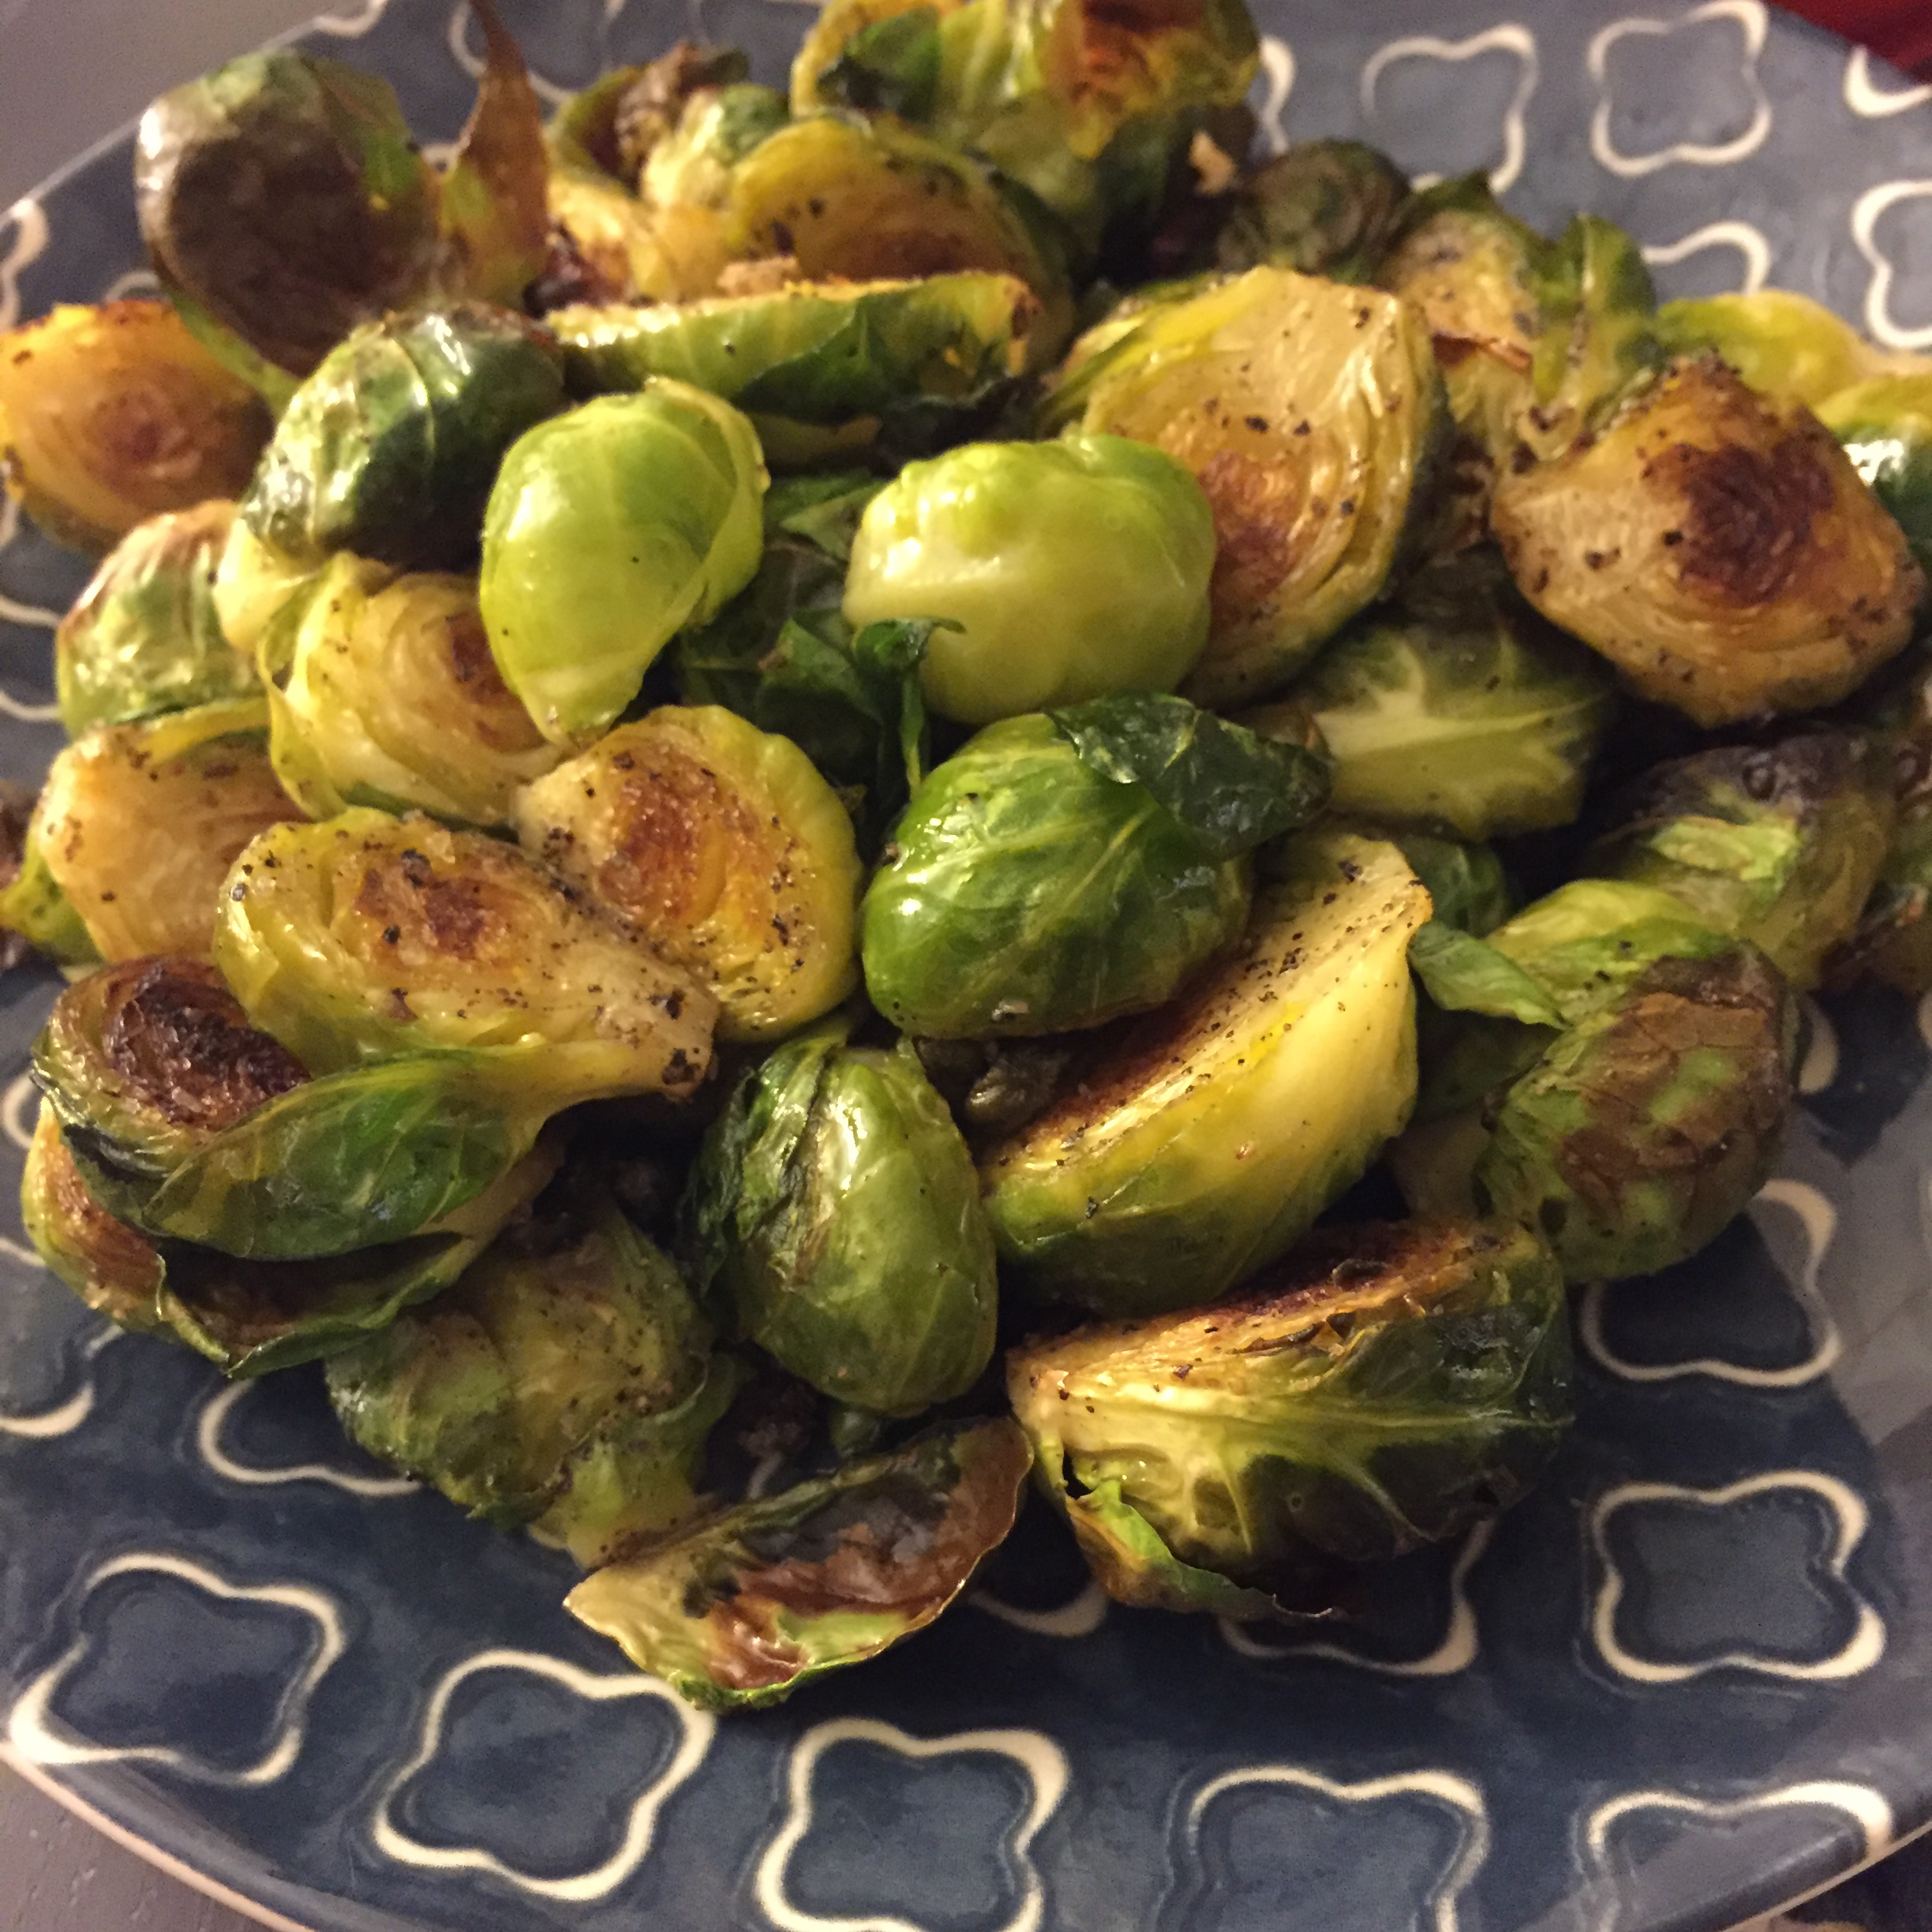 Delicious Baked Brussels Sprouts with Roasted Garlic: A Flavorful Twist on a Classic Side Dish